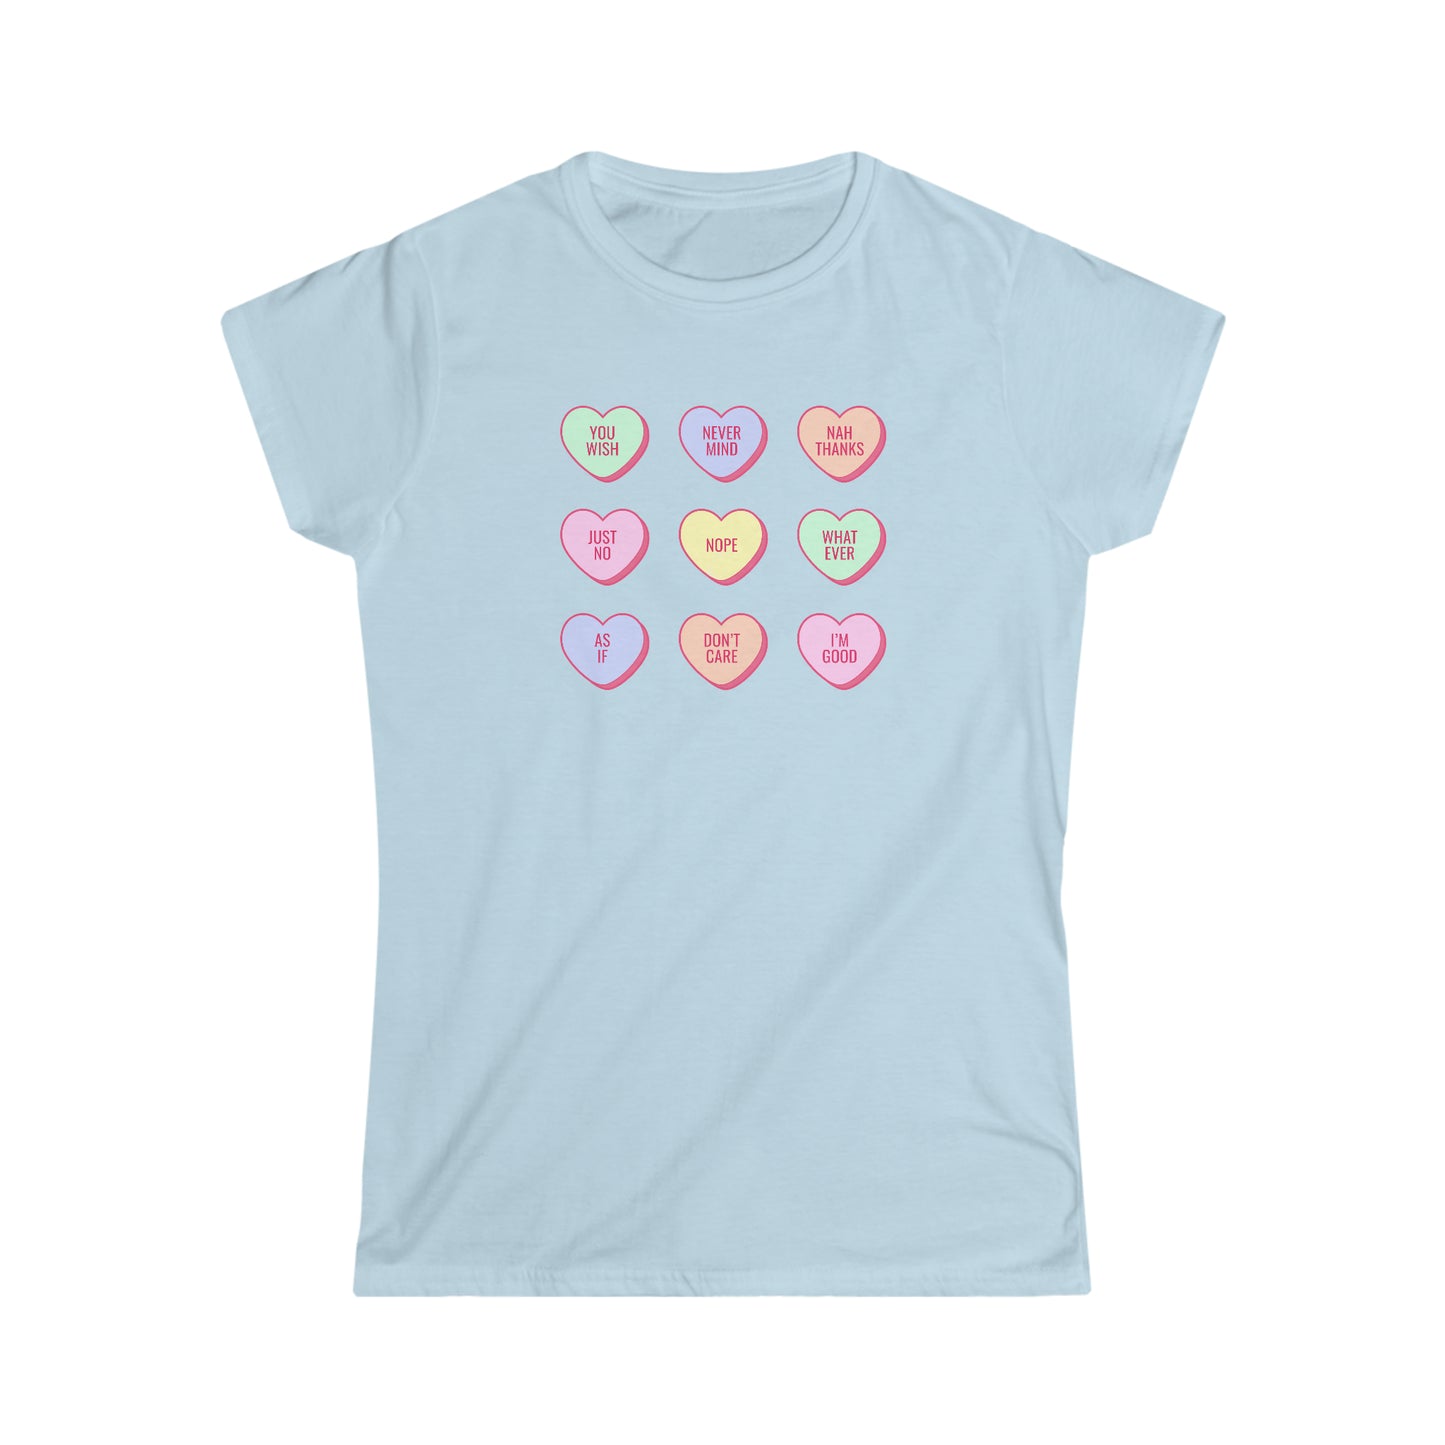 Valentines Heart Candy Girly T-Shirt